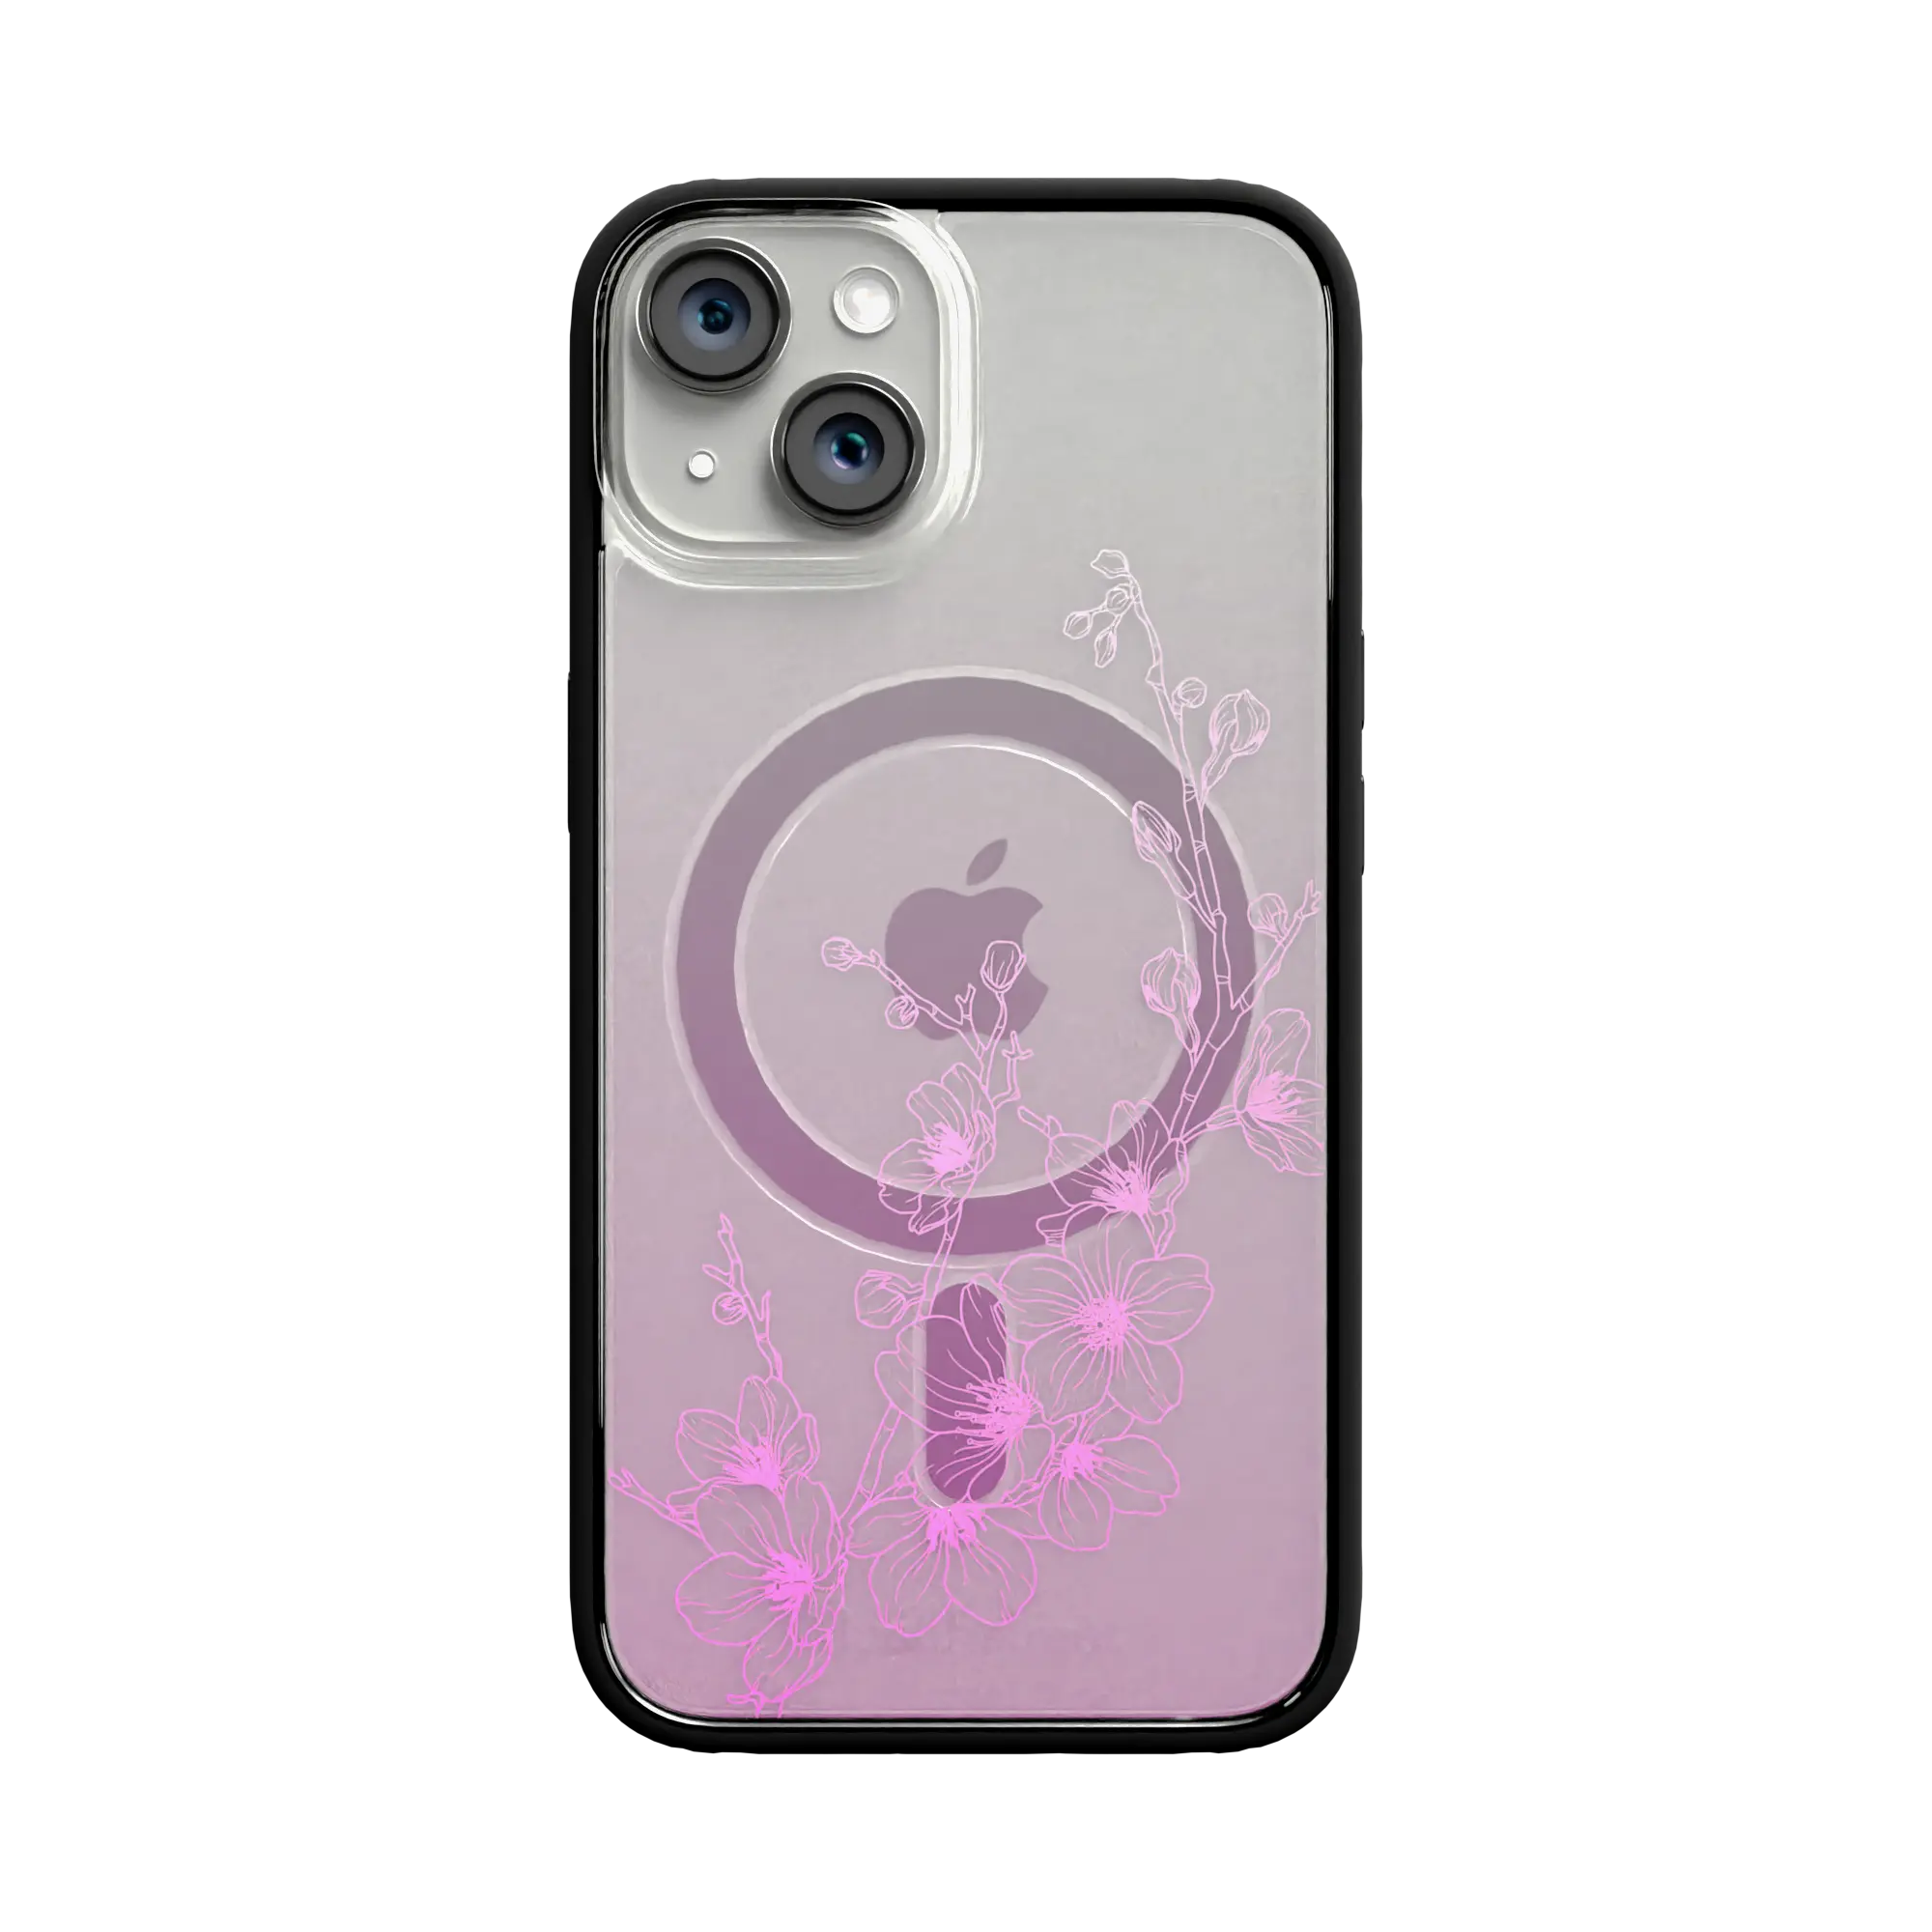 Apple-iPhone-12-12-Pro-Crystal-Clear Ballet Blush | Protective MagSafe Case | Ombre Bouquet Collection for Apple iPhone 12 Series cellhelmet cellhelmet